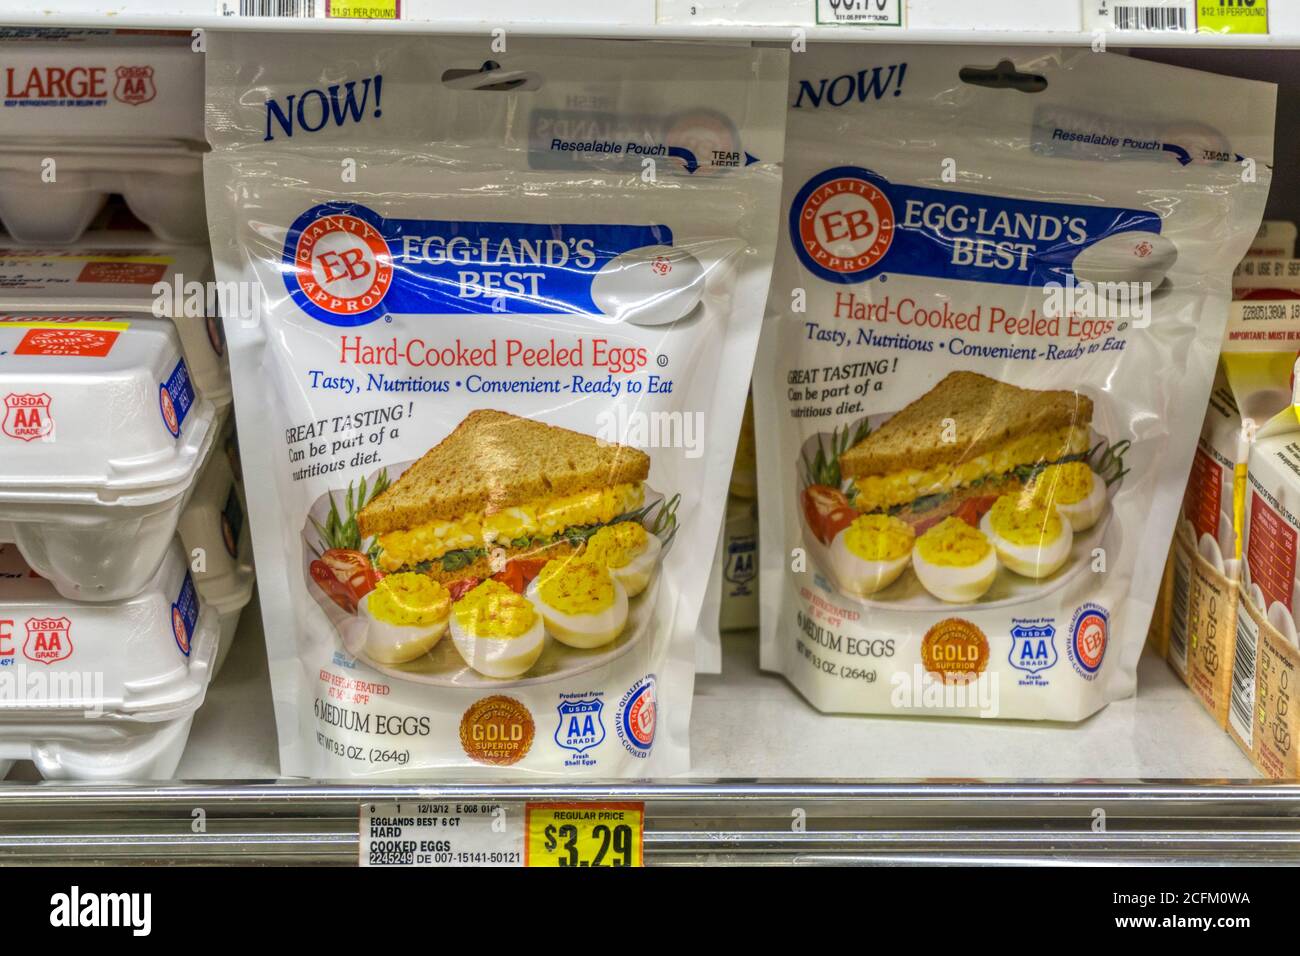 Packets of ready-peeled hard-boiled eggs for sale in an American supermarket. Stock Photo